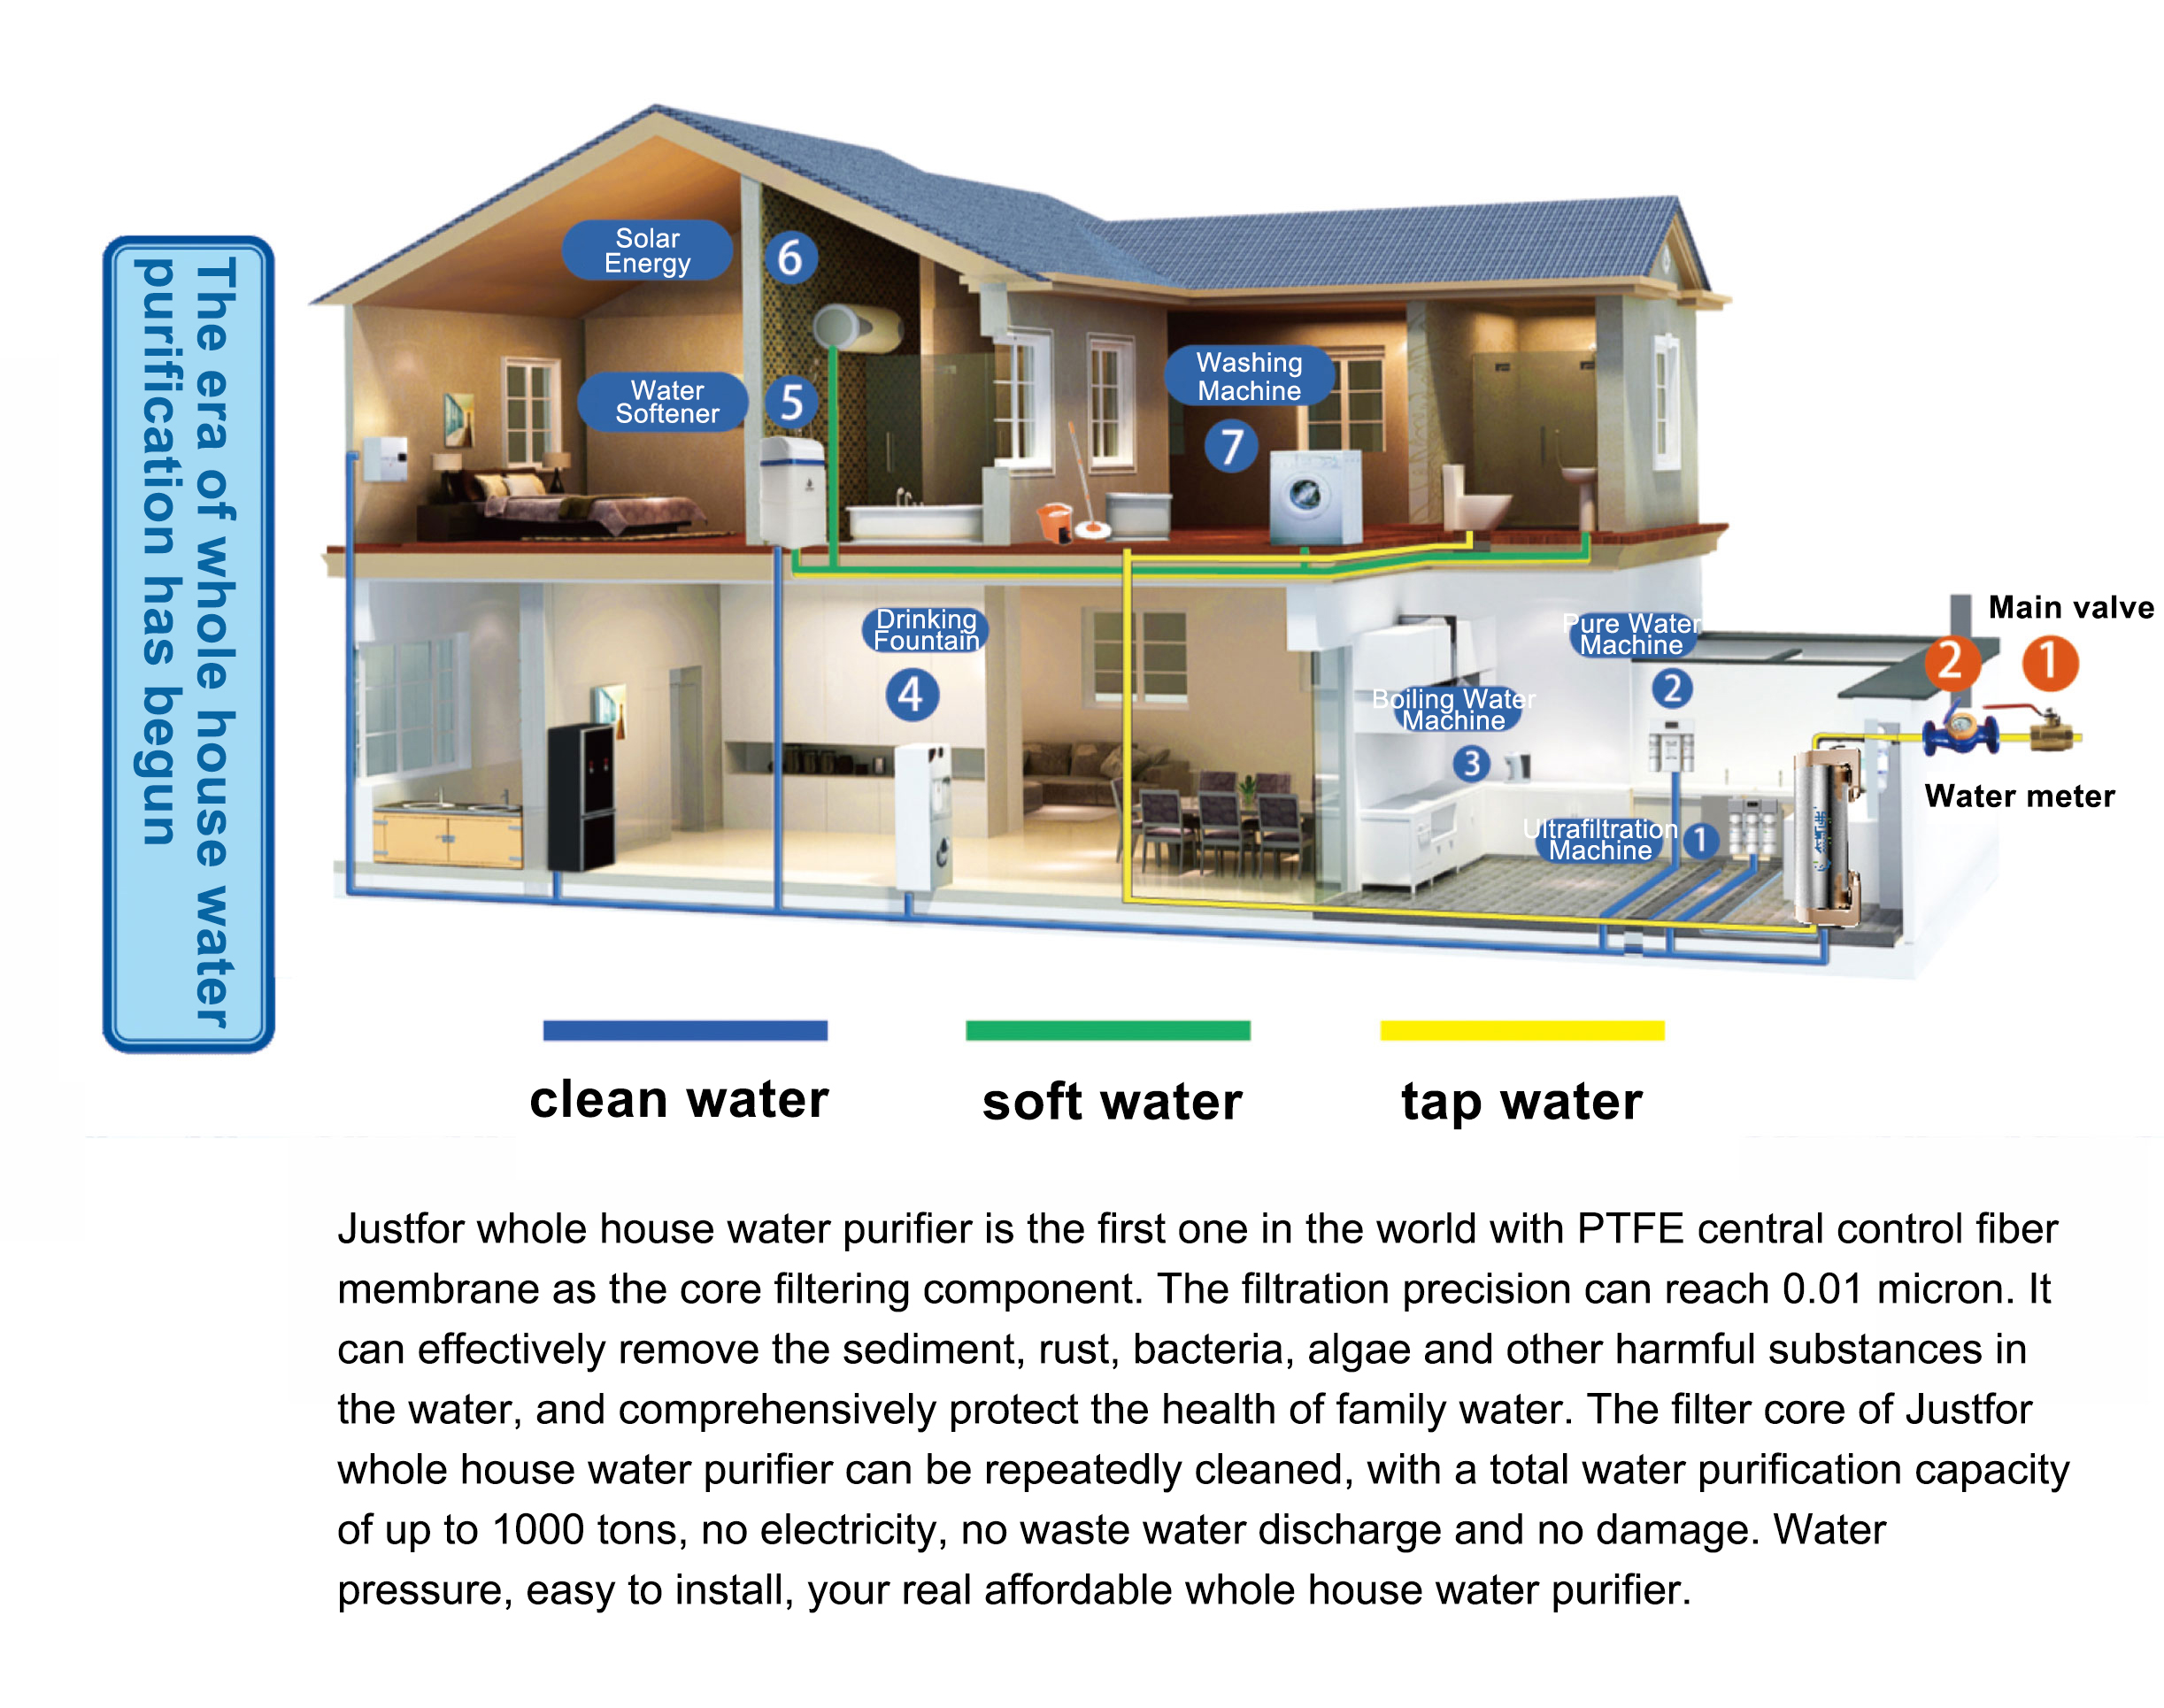 Justfor Whole house water purifier